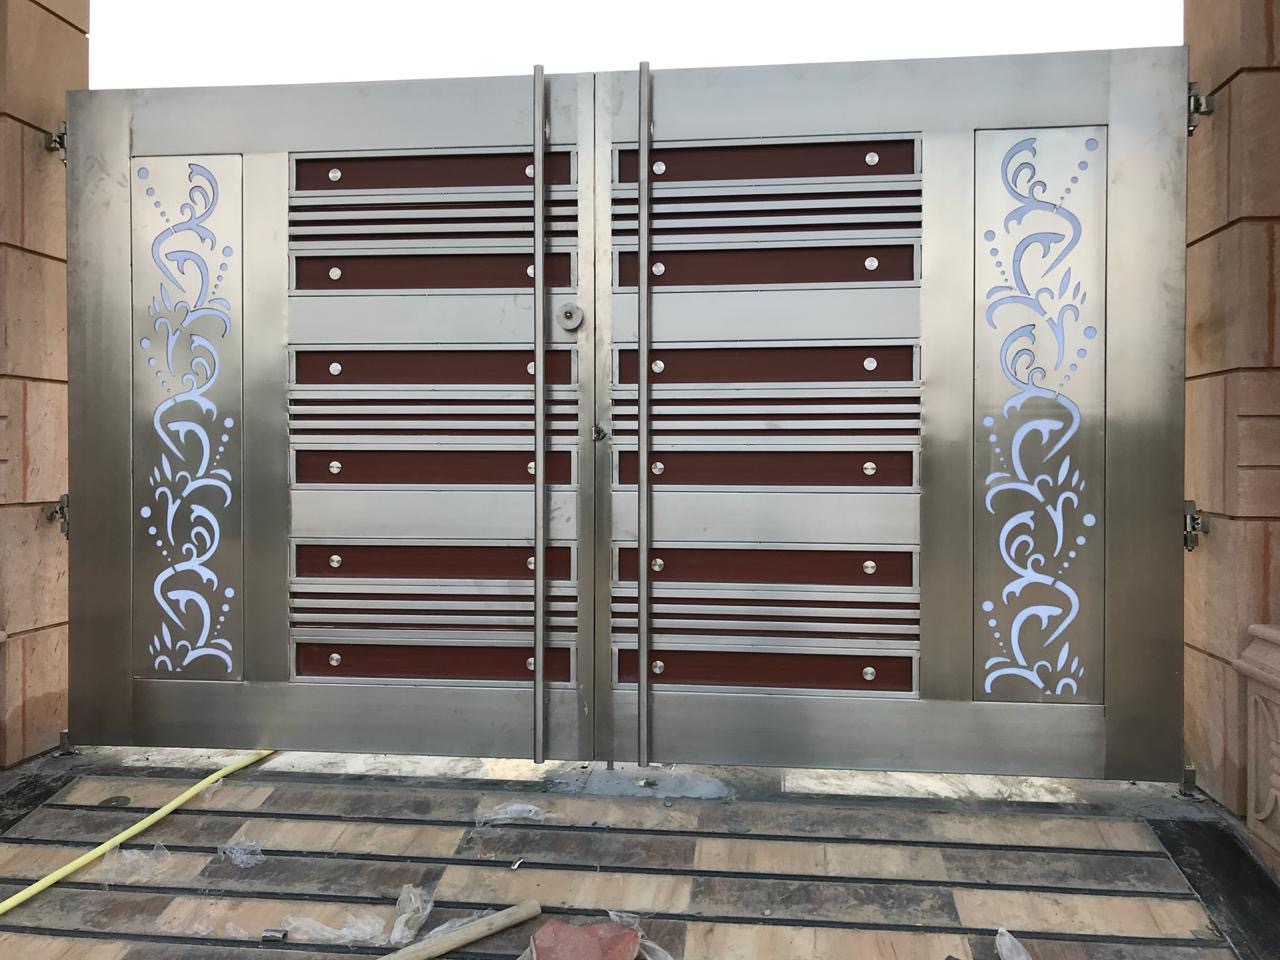 STAINLESS STEEL GATES – Commercial hotel kitchen equipment ...